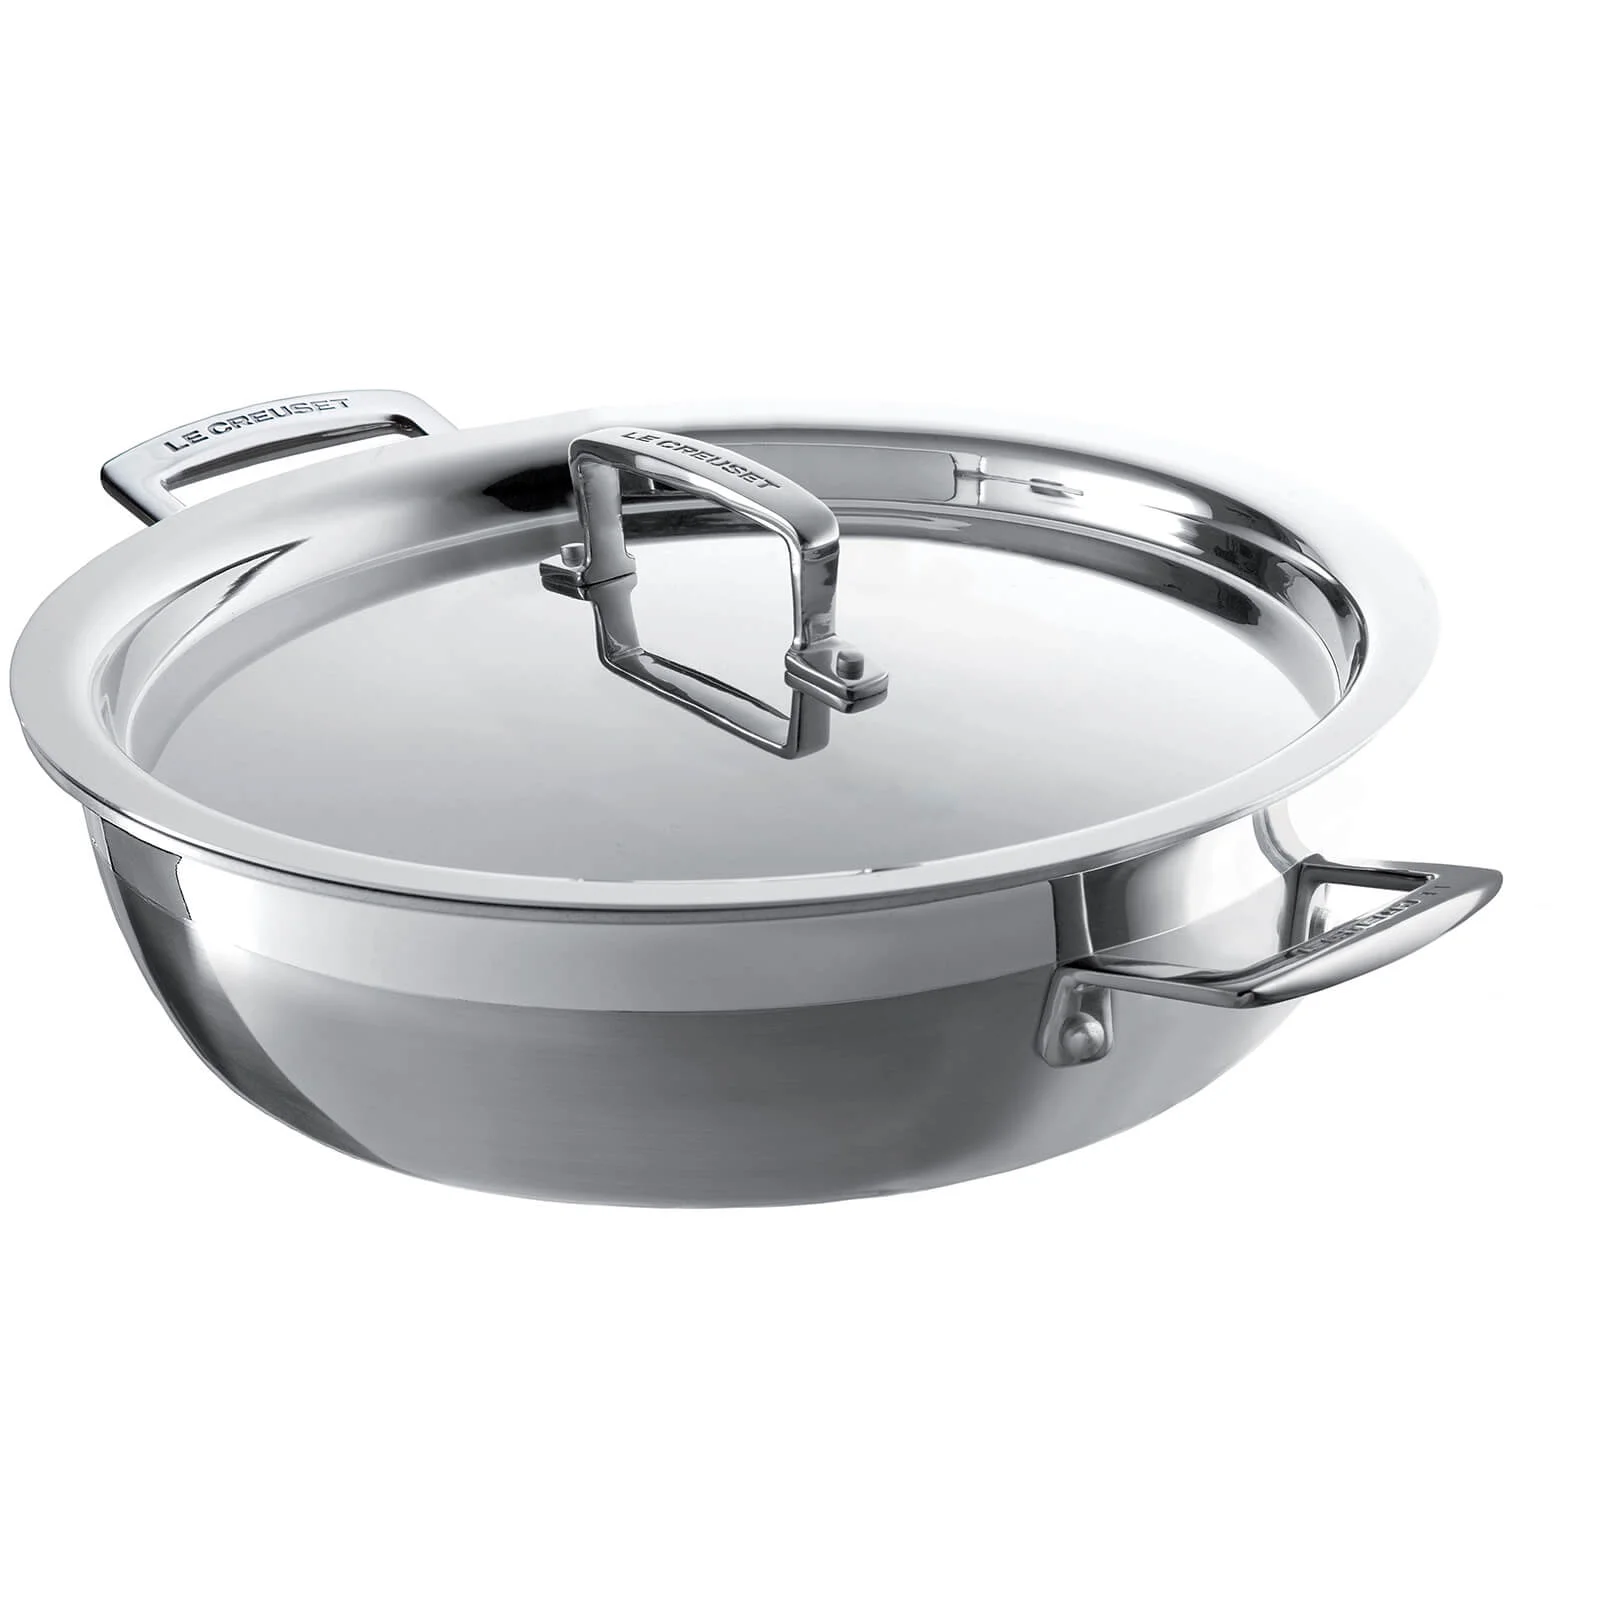 Le Creuset 3-Ply Stainless Steel Shallow Casserole Dish - 24cm Image 1